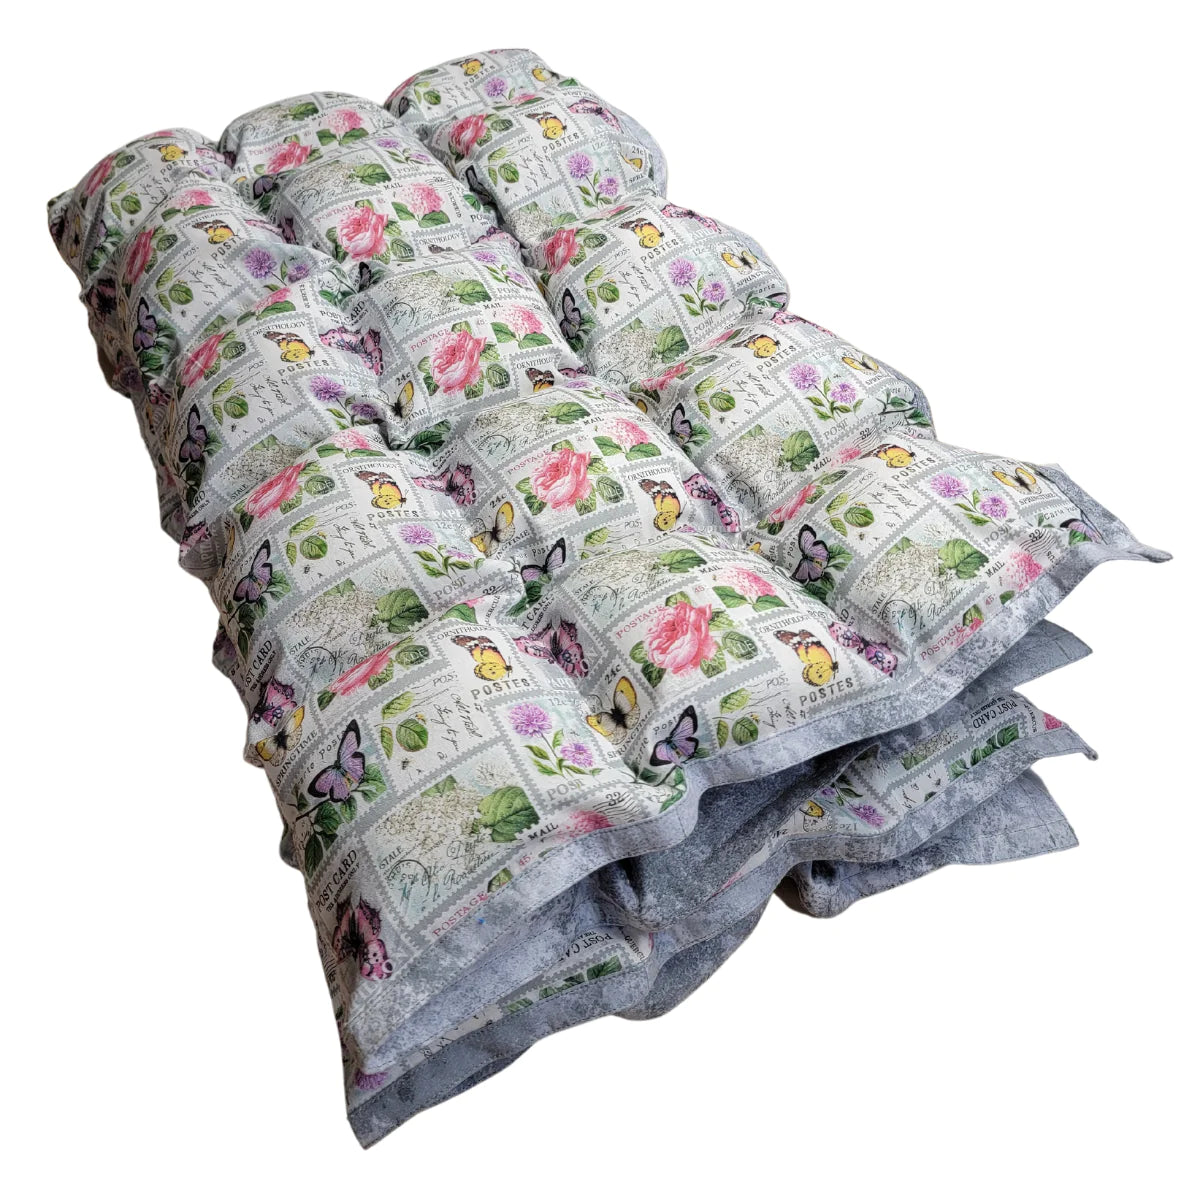 Clearance Weighted Blanket - Medium 10 lb Butterflies in Print (for 80+ lb user)